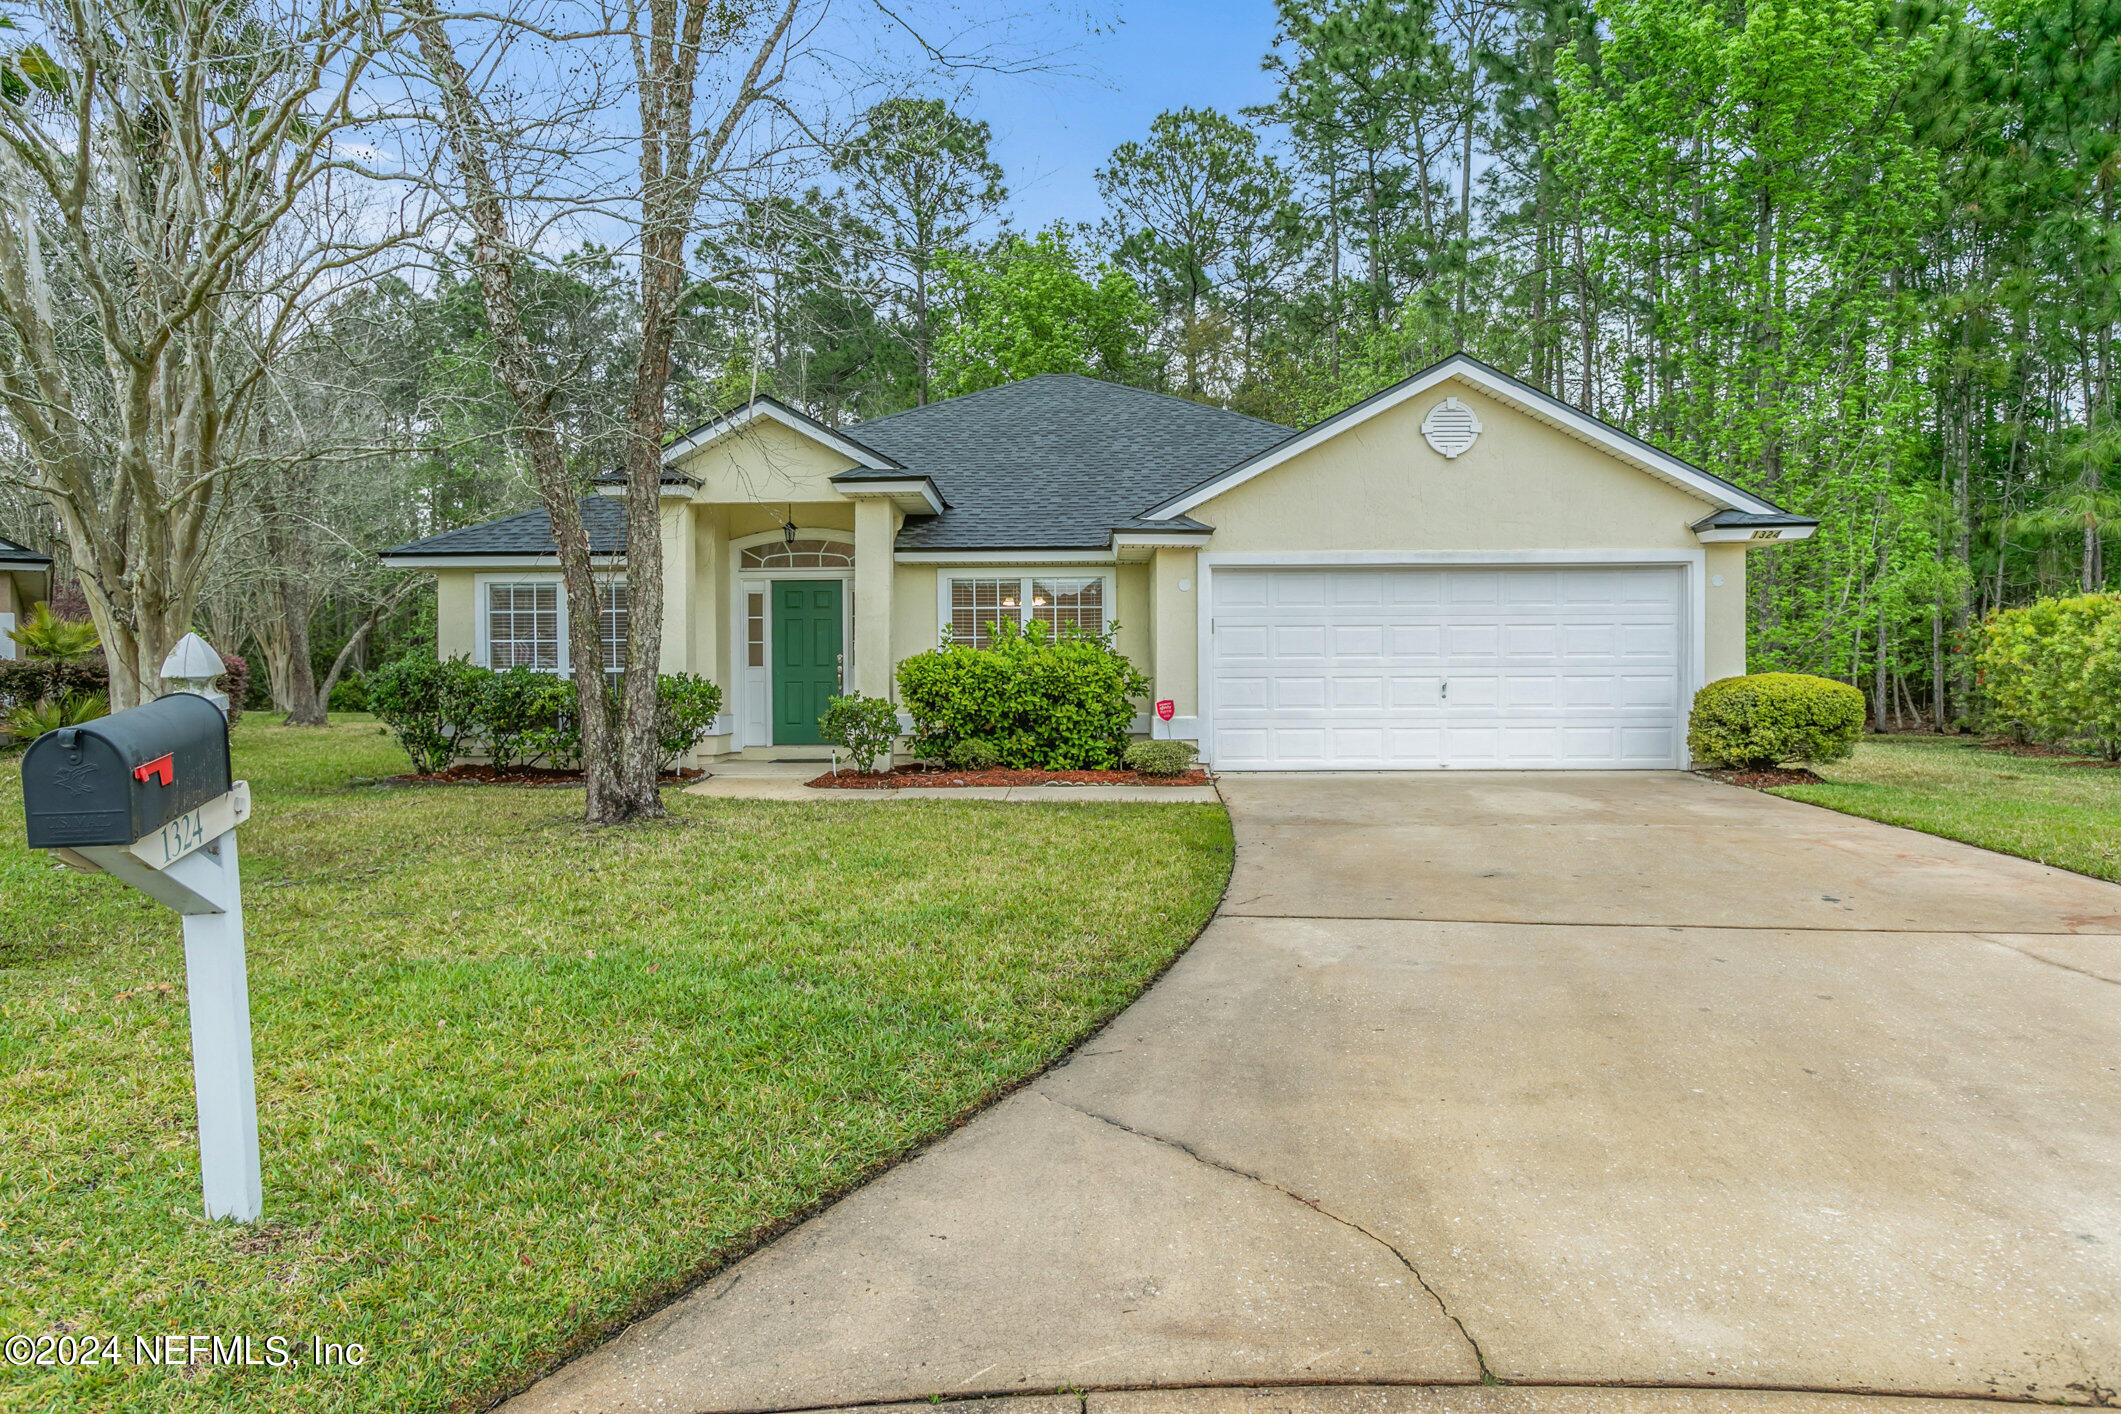 St Johns, FL home for sale located at 1324 E CHINABERRY Court, St Johns, FL 32259